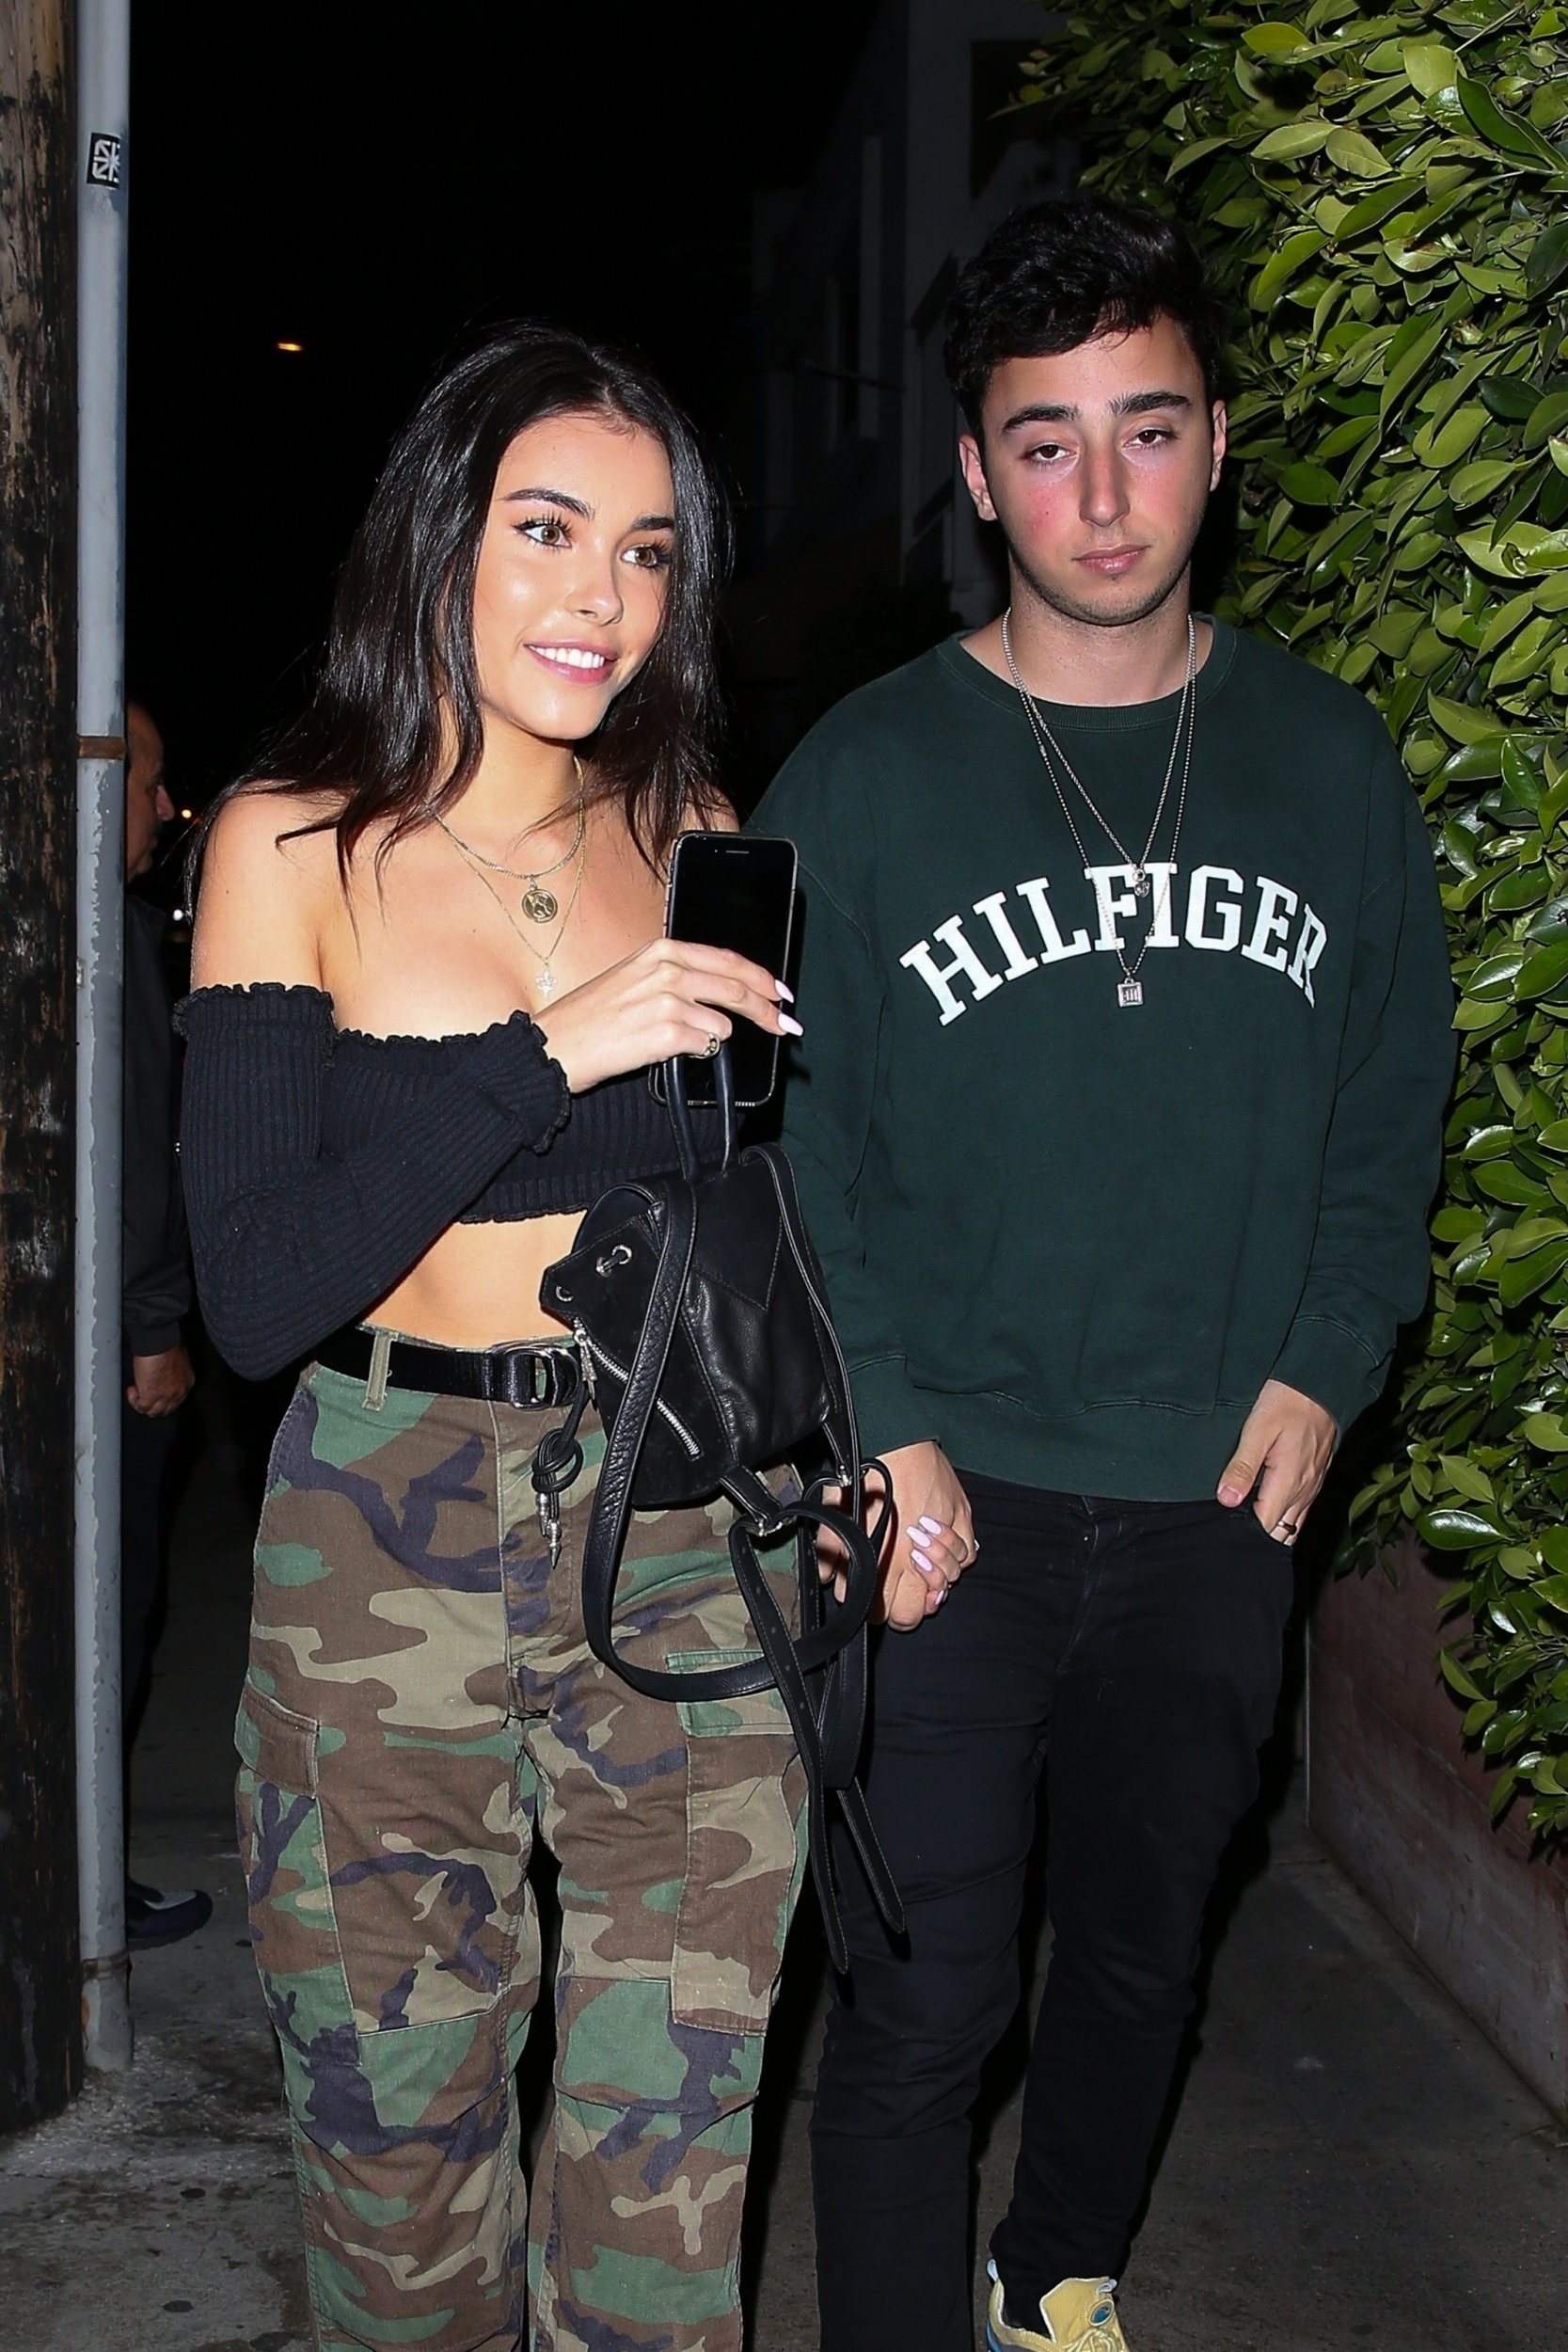 Madison Beer and boyfriend Zack Dia look lovedup on rare date night